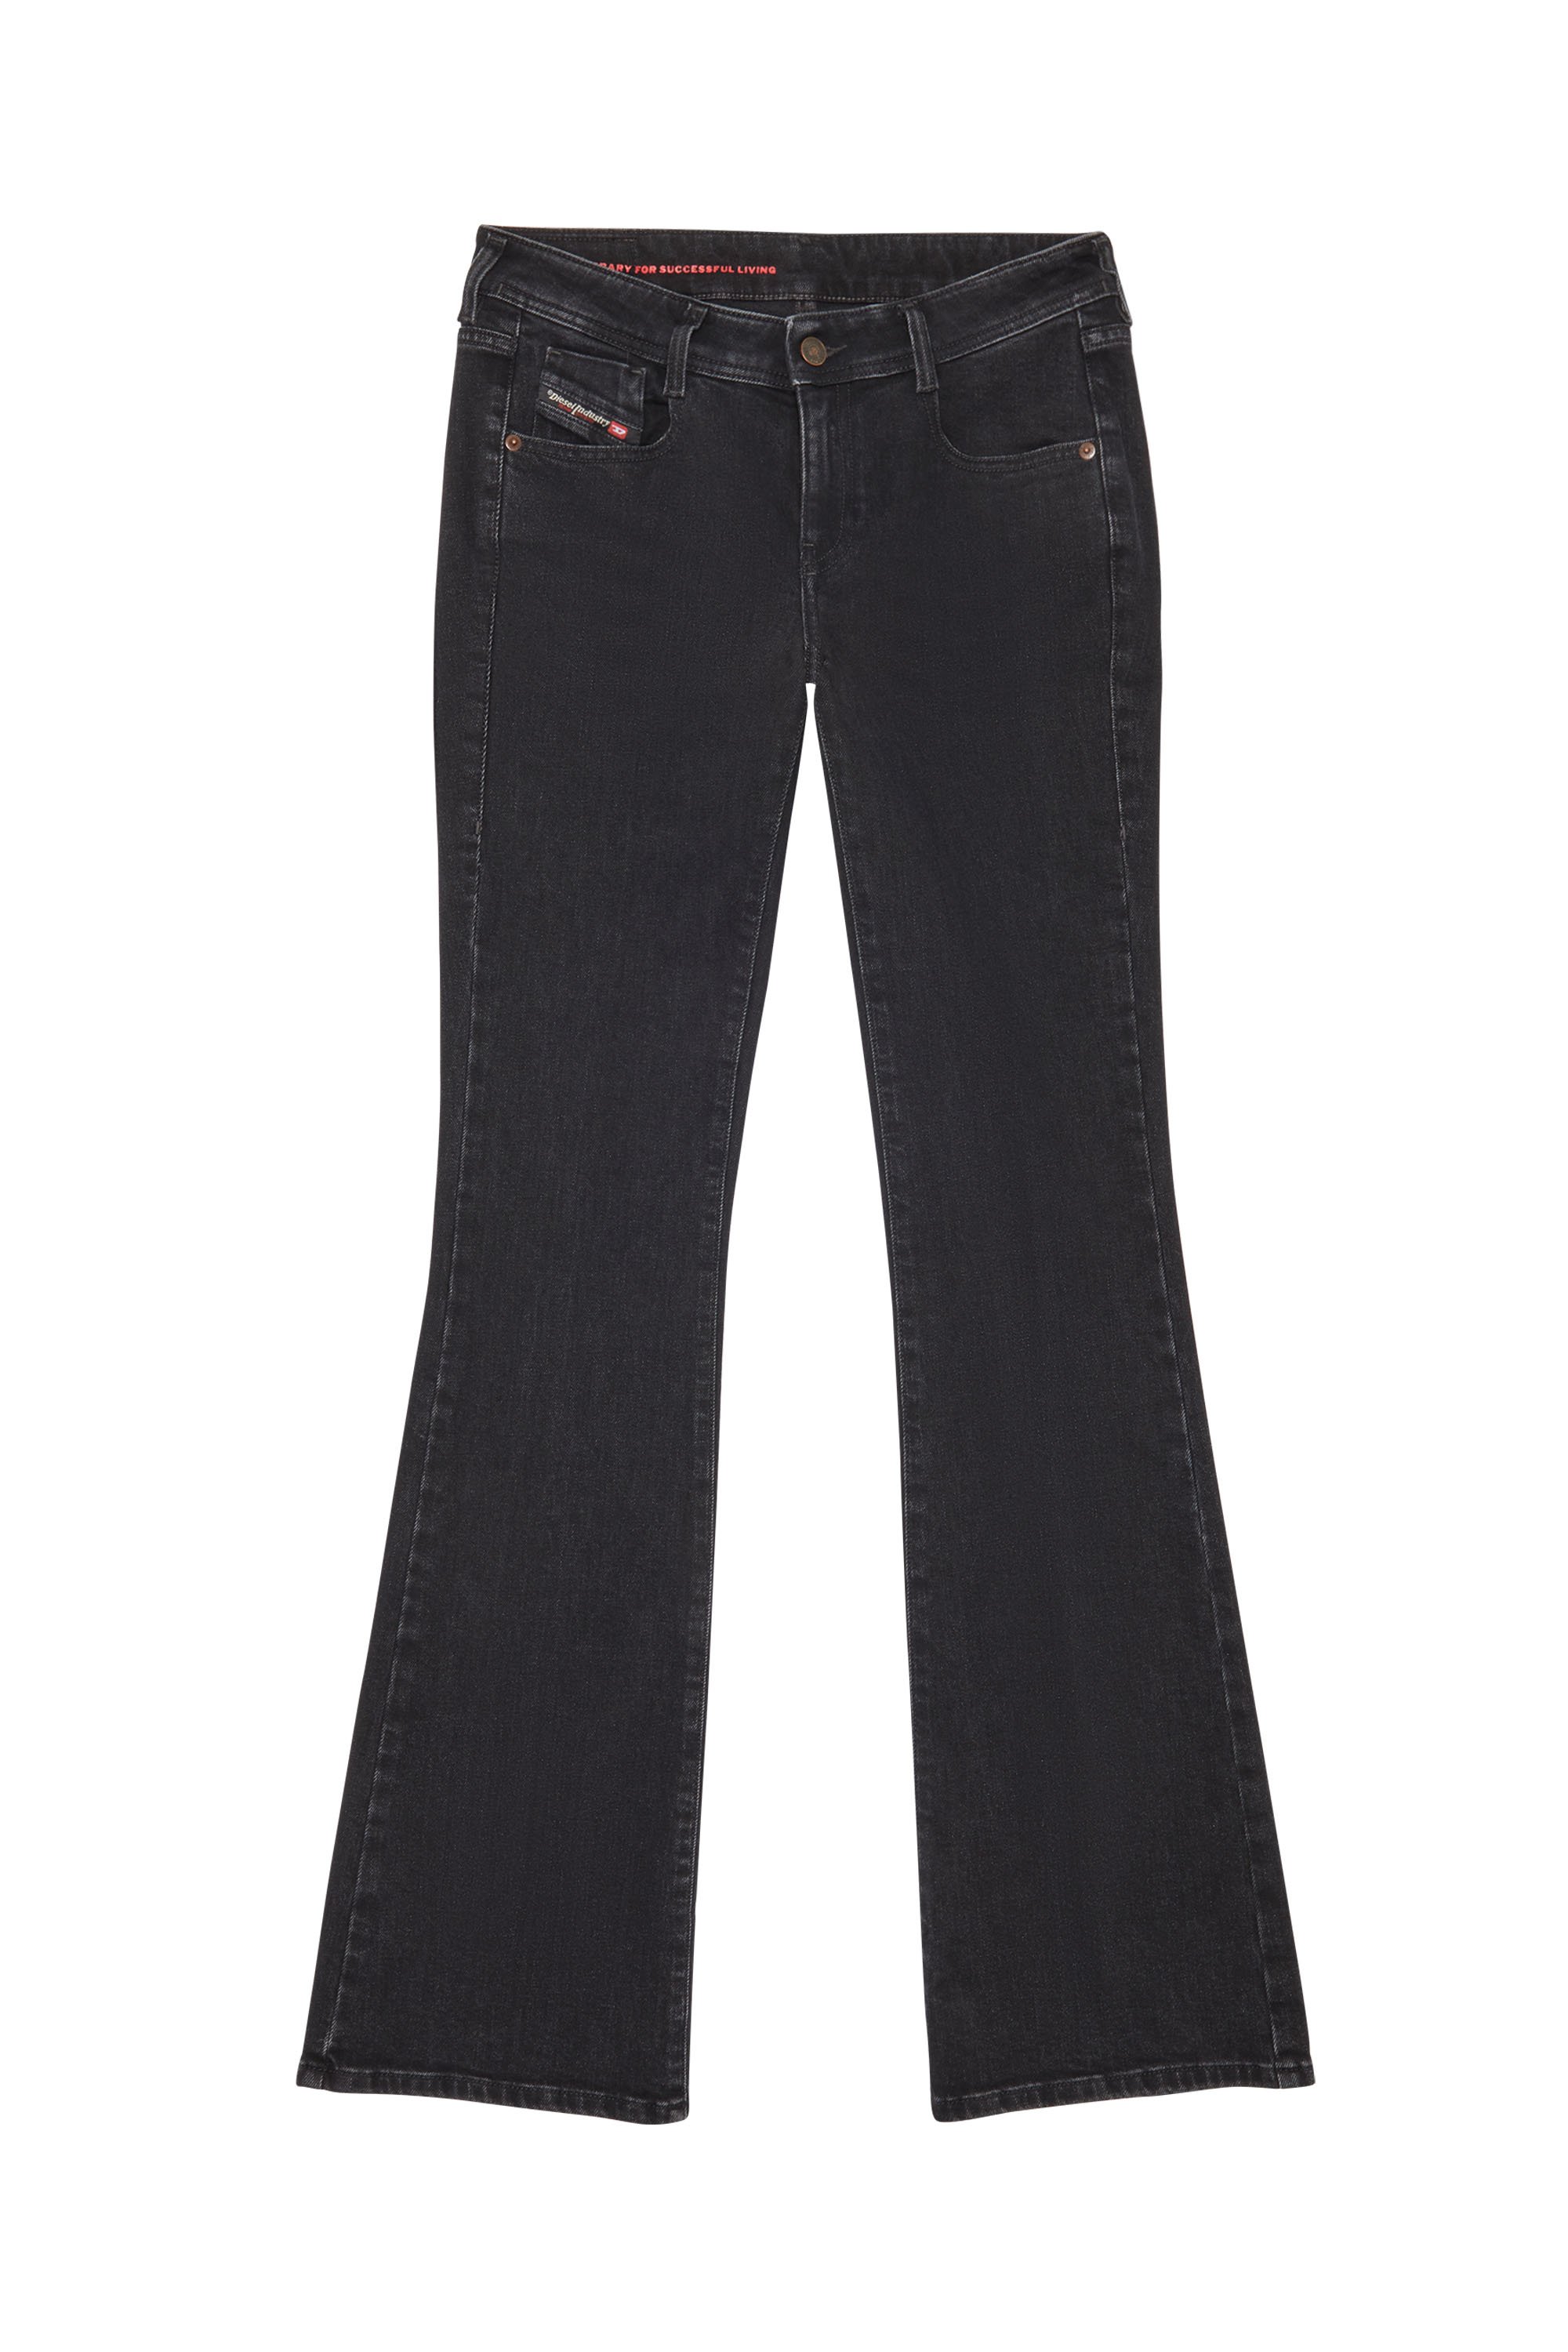 1969 D-EBBEY Z9C25 Bootcut and Flare Jeans, Nero/Grigio scuro - Jeans